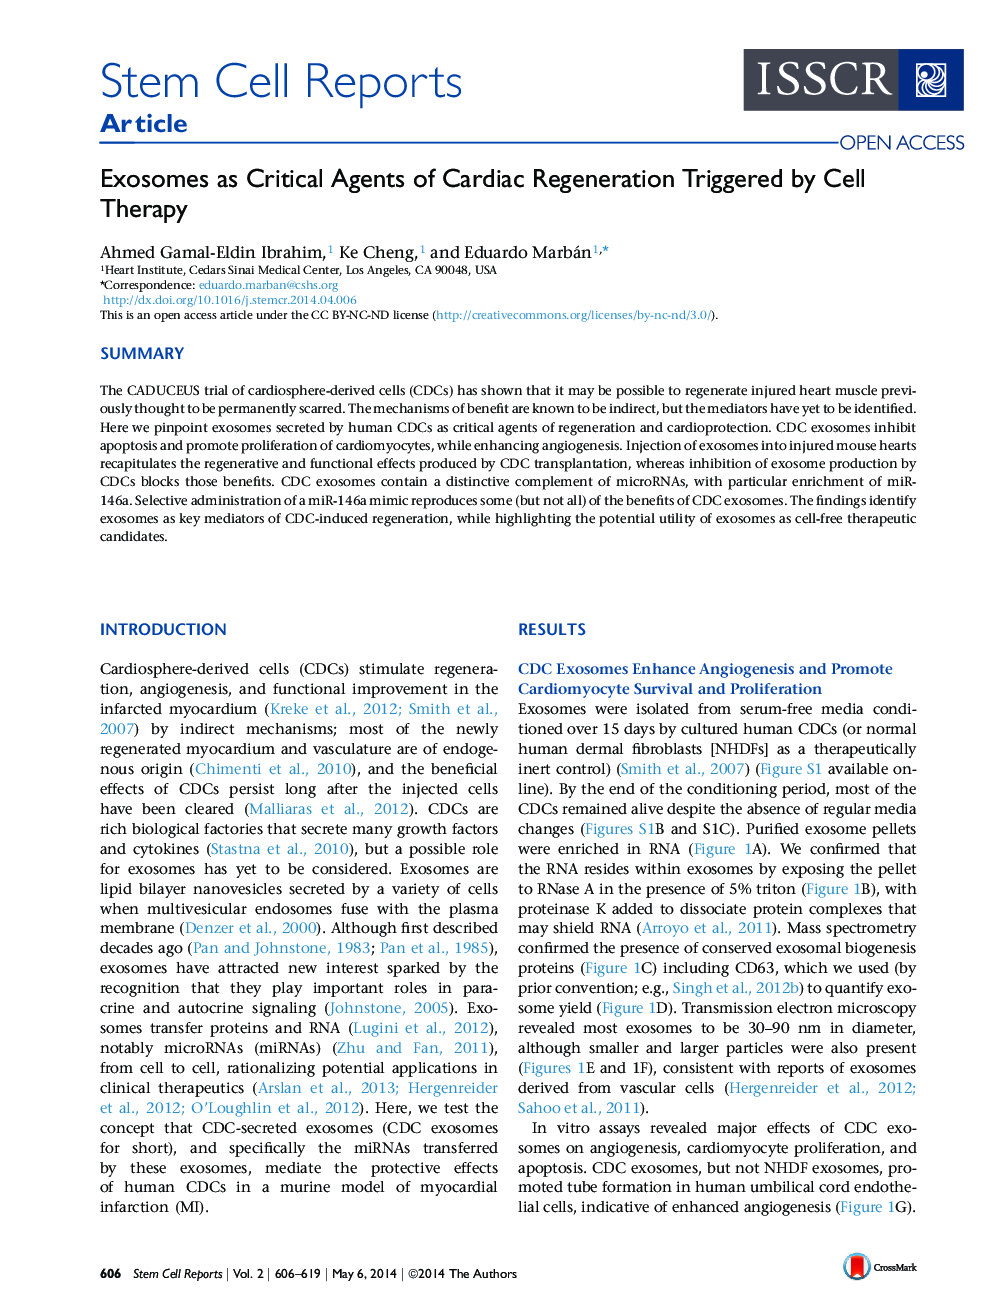 Exosomes as Critical Agents of Cardiac Regeneration Triggered by Cell Therapy 